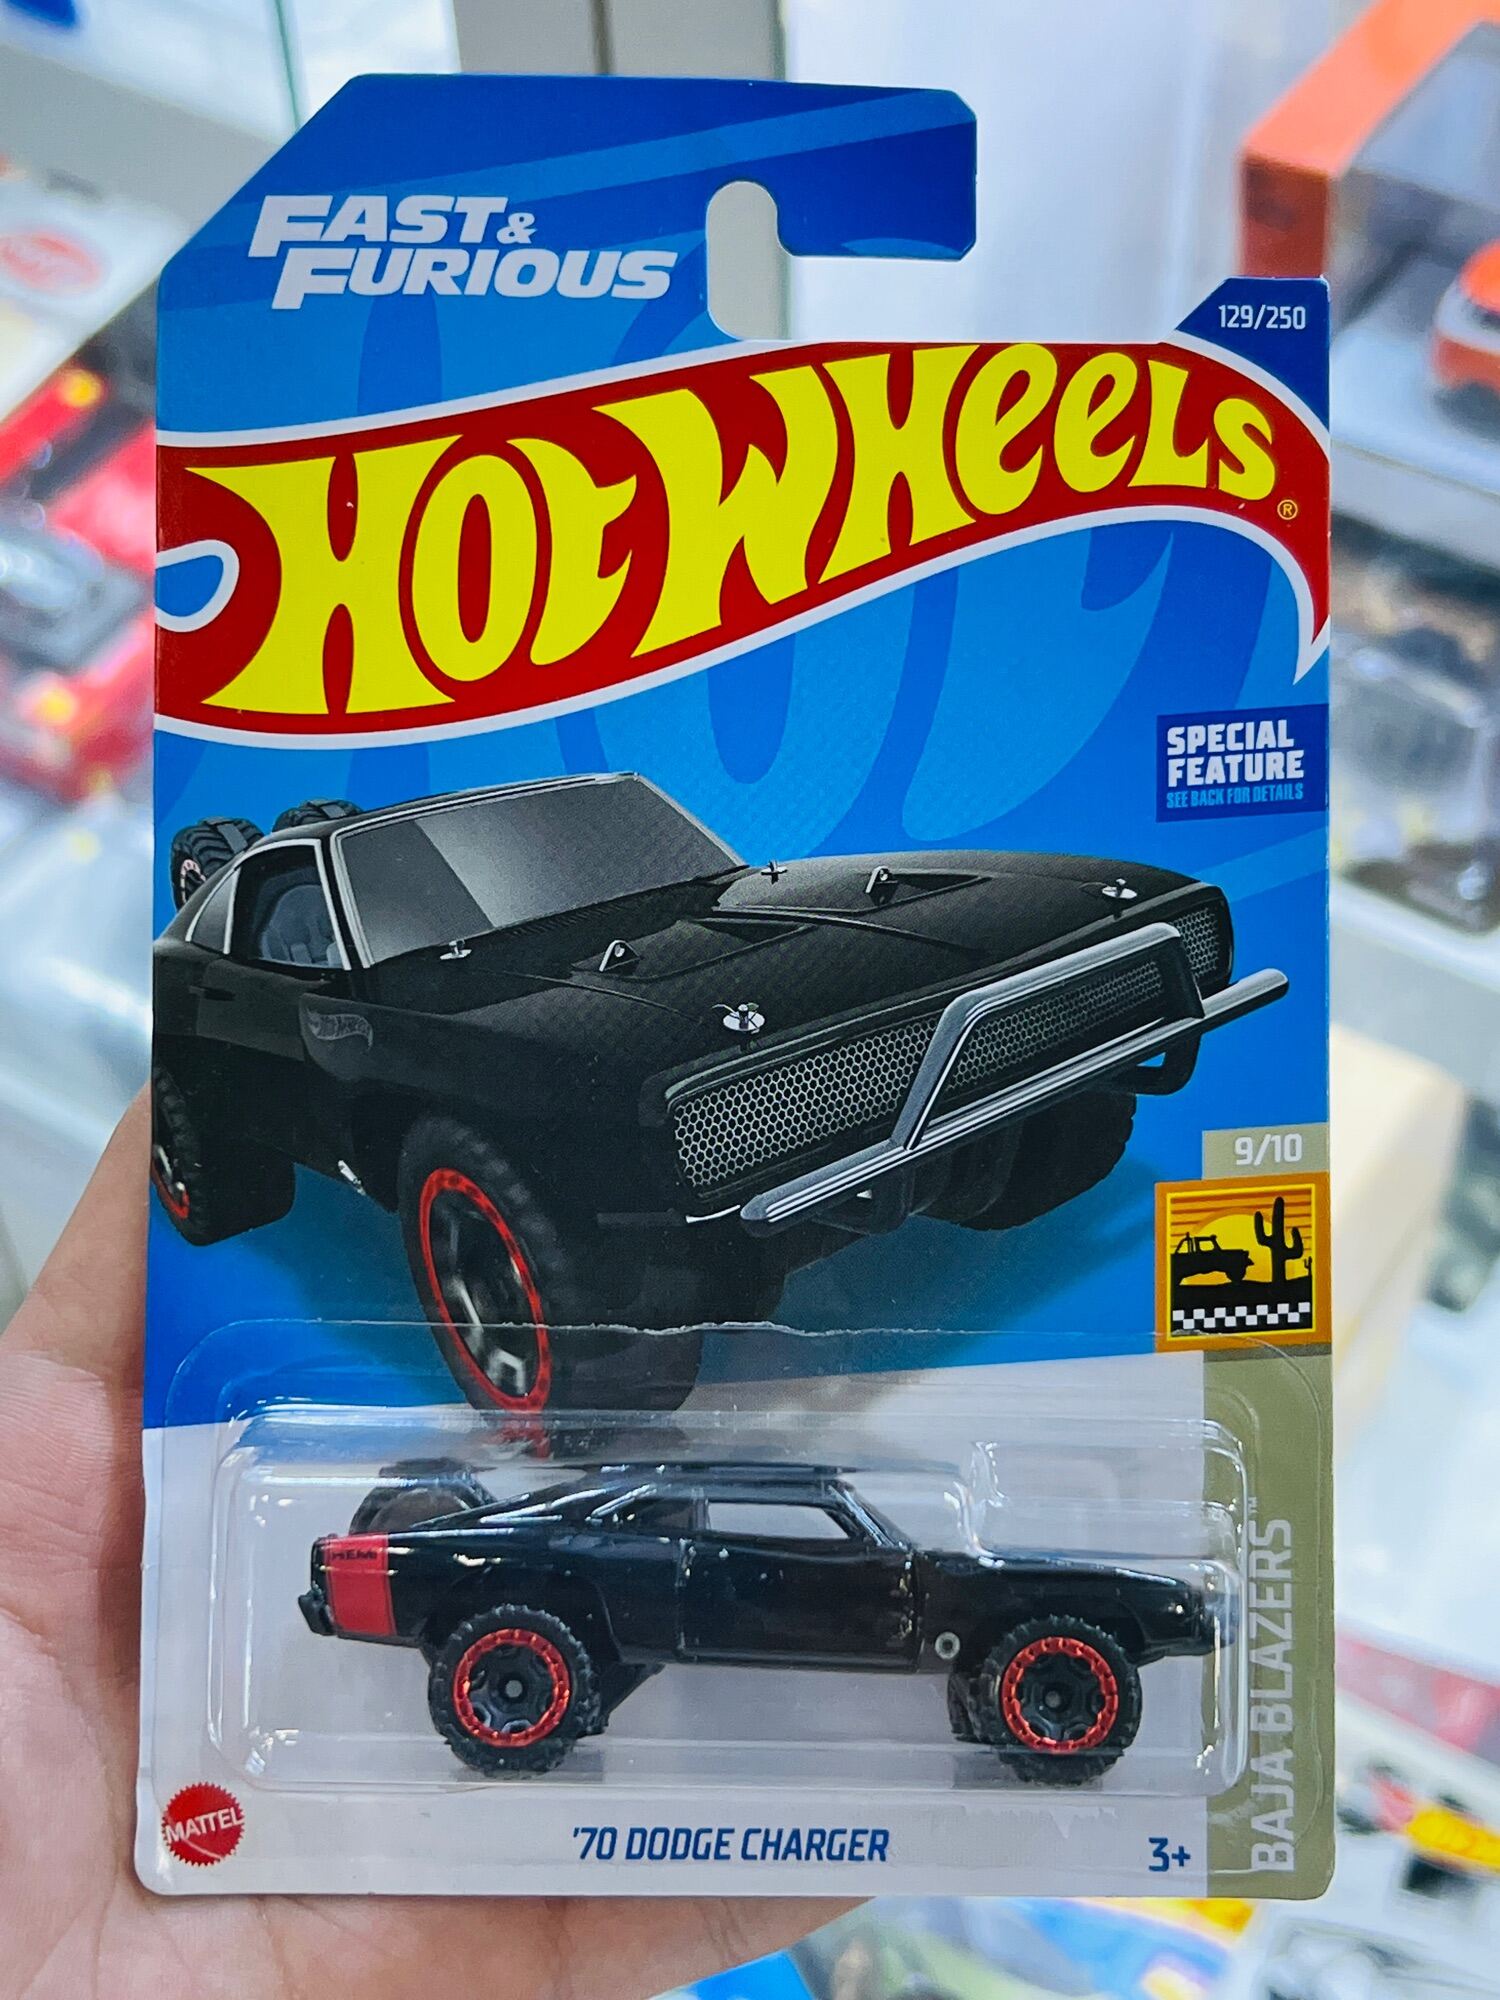 Introducir 46+ imagen hot wheels 70 dodge charger fast and furious